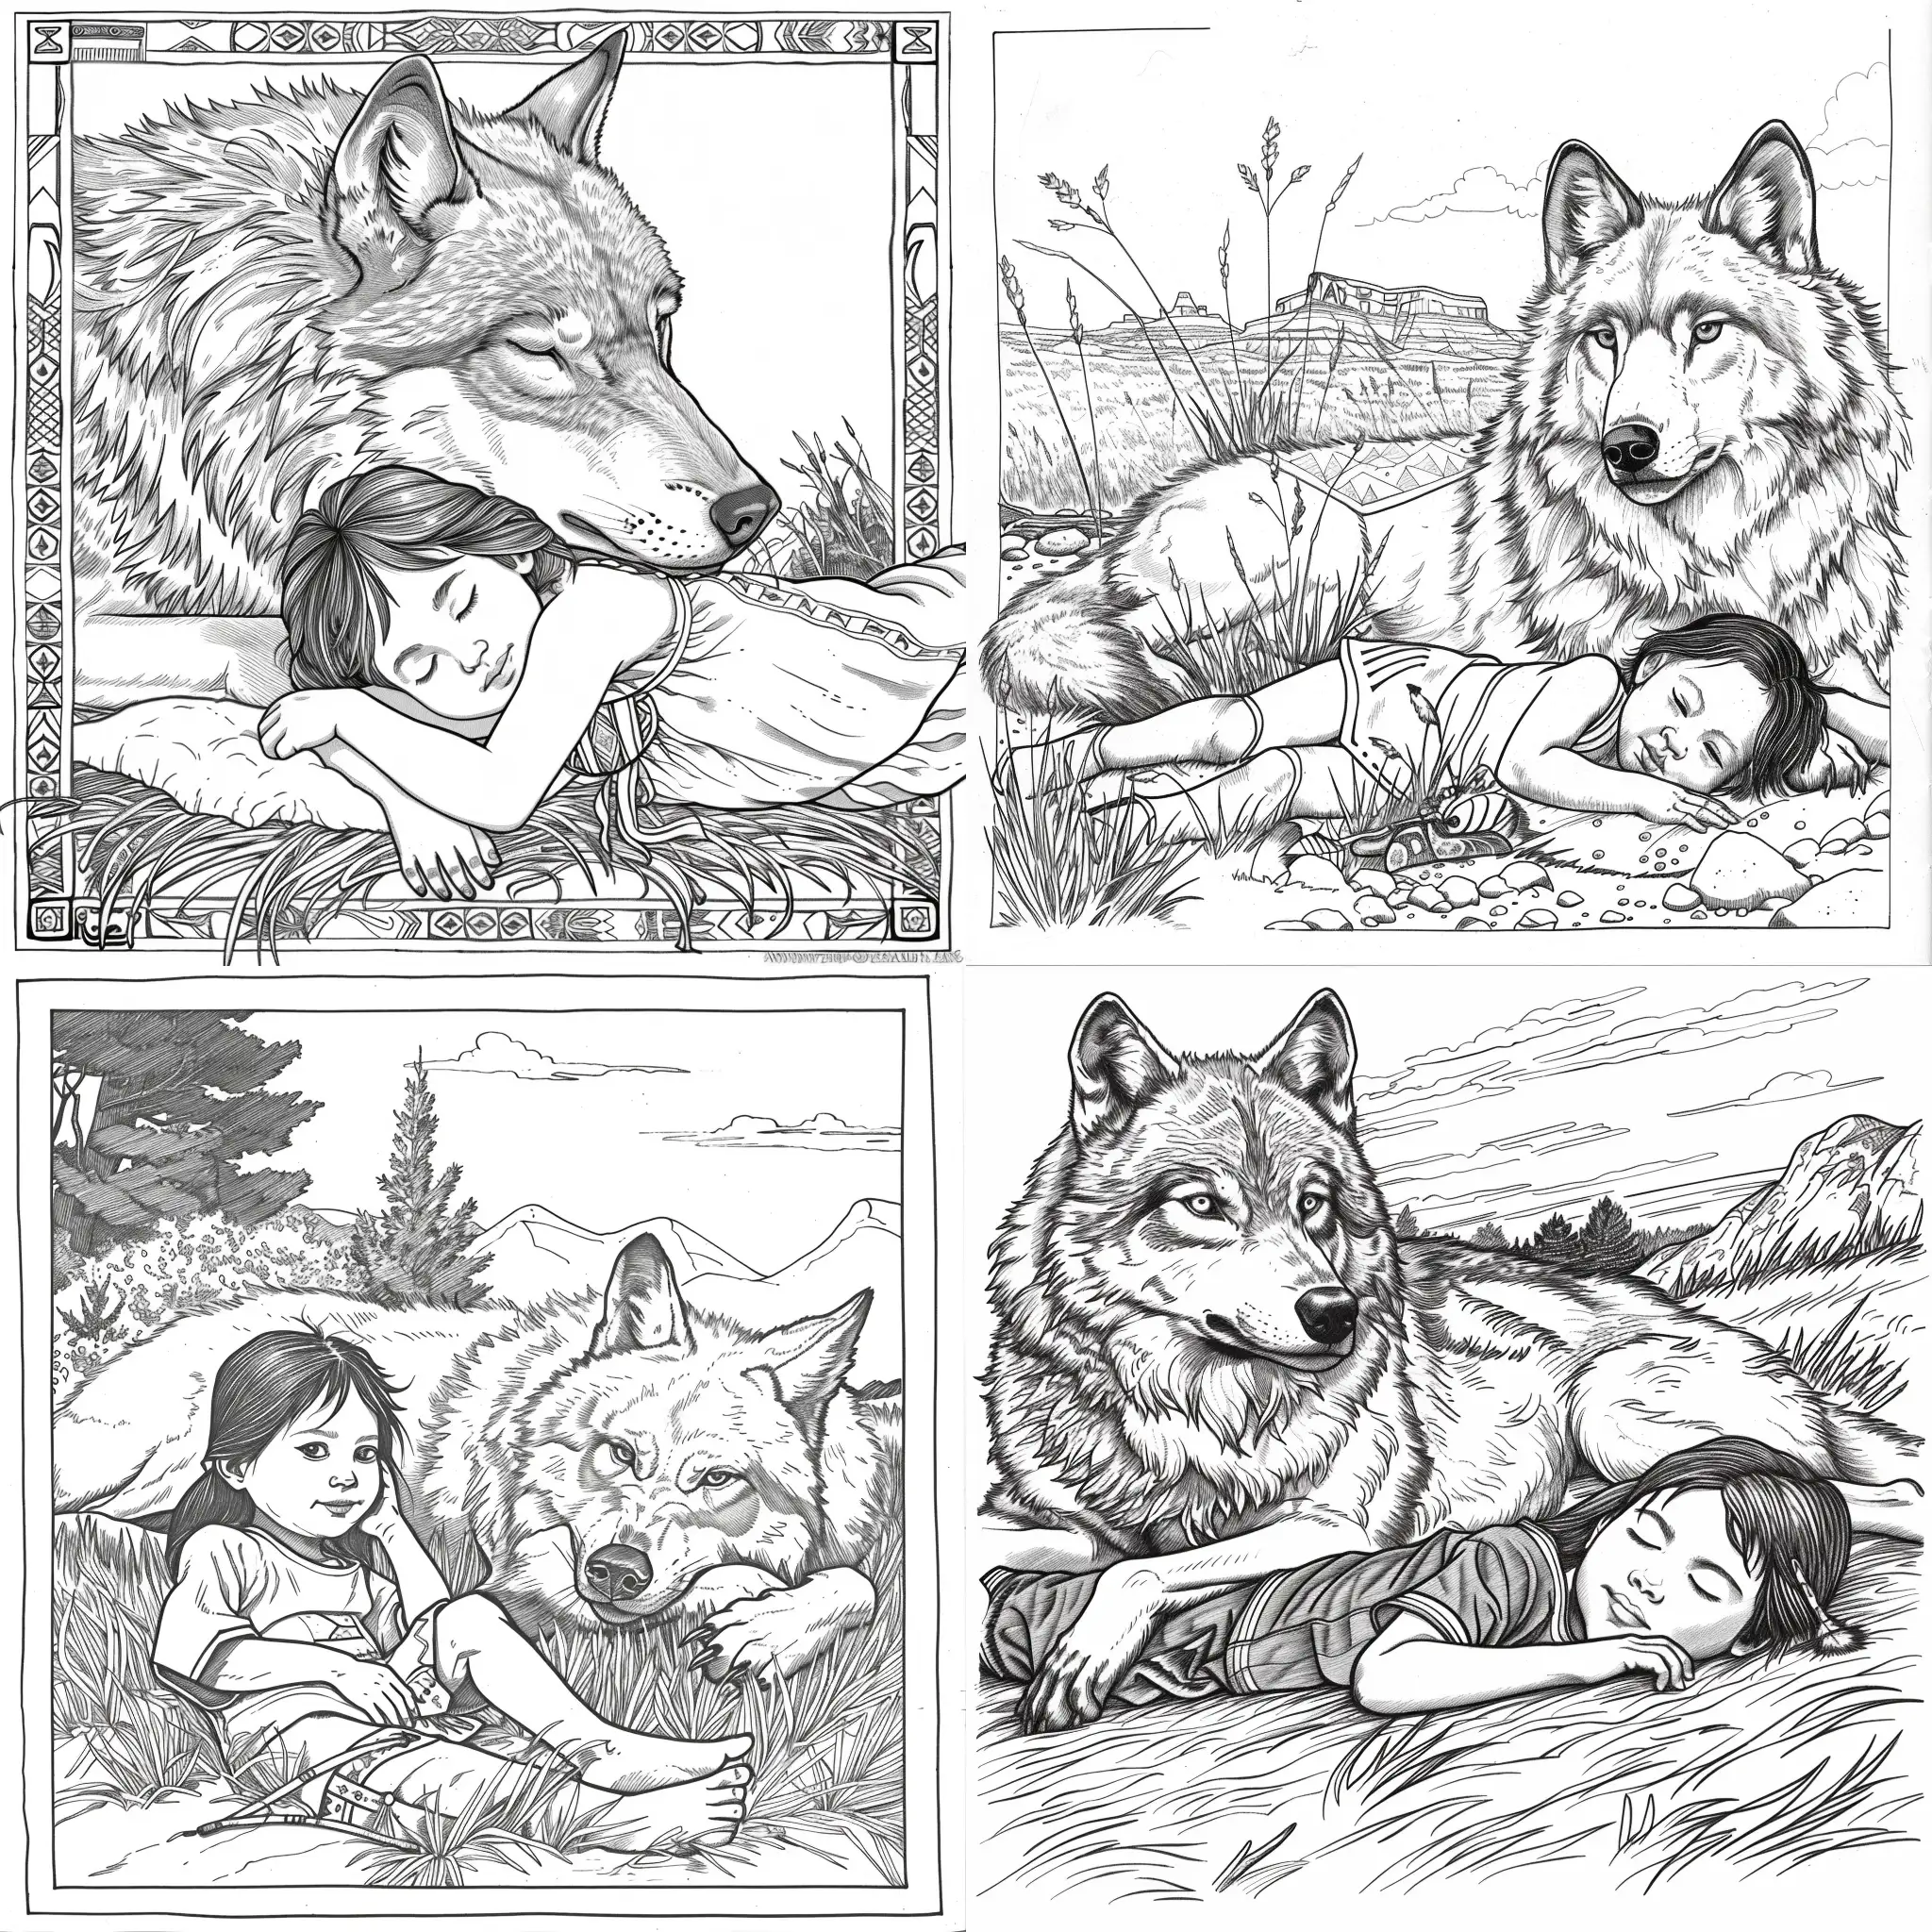 Imagine a Native American coloring book page with no backgroud and a native american child laying by a wolf for a 8.5 x 11 page